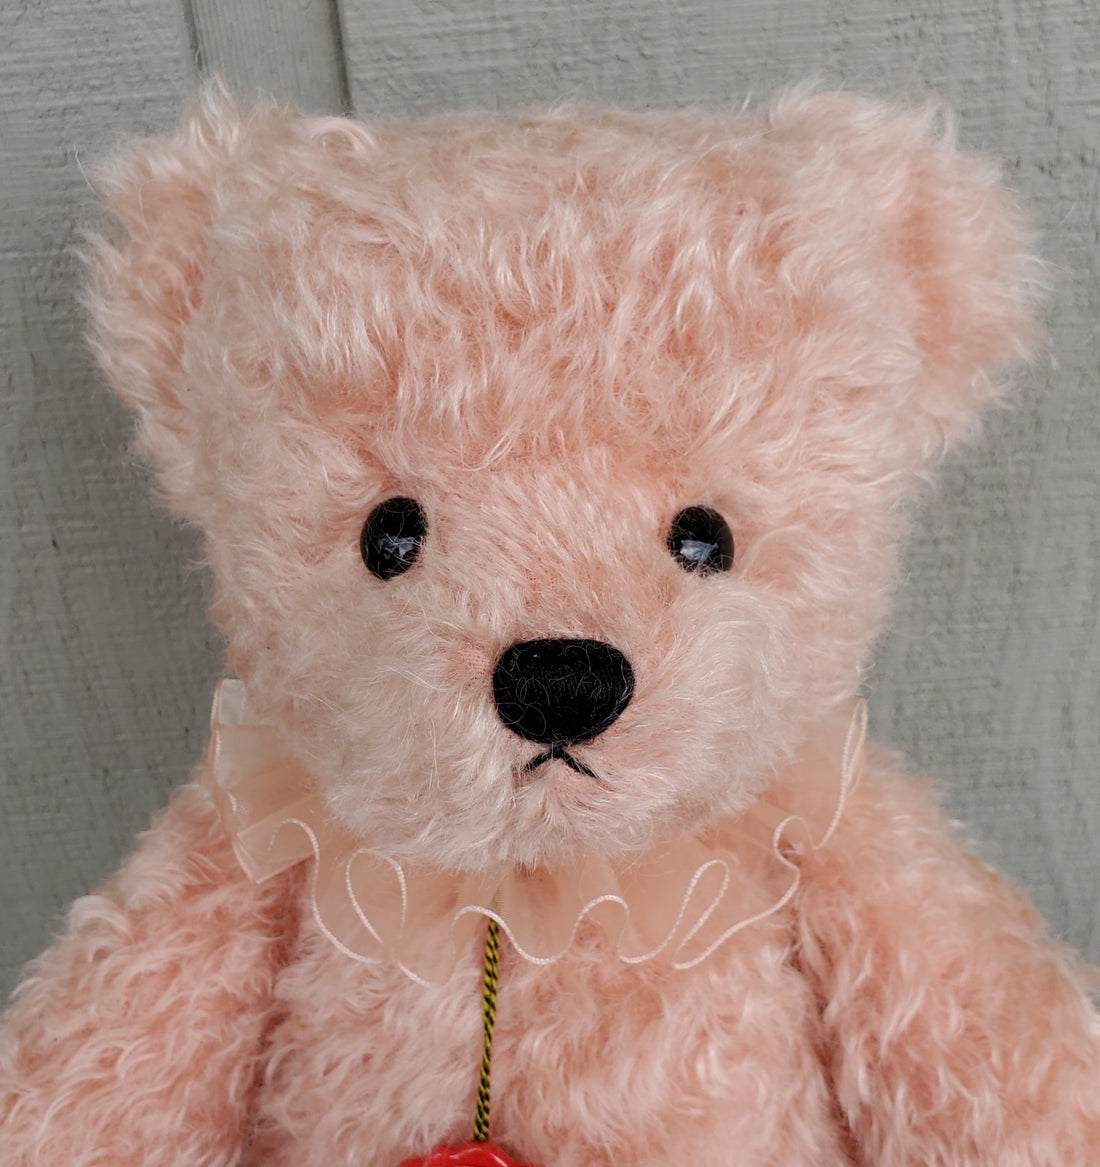 Rosi - 18" Mohair Bear with Growler Sound by Teddy Hermann, #30 of 100 Made!